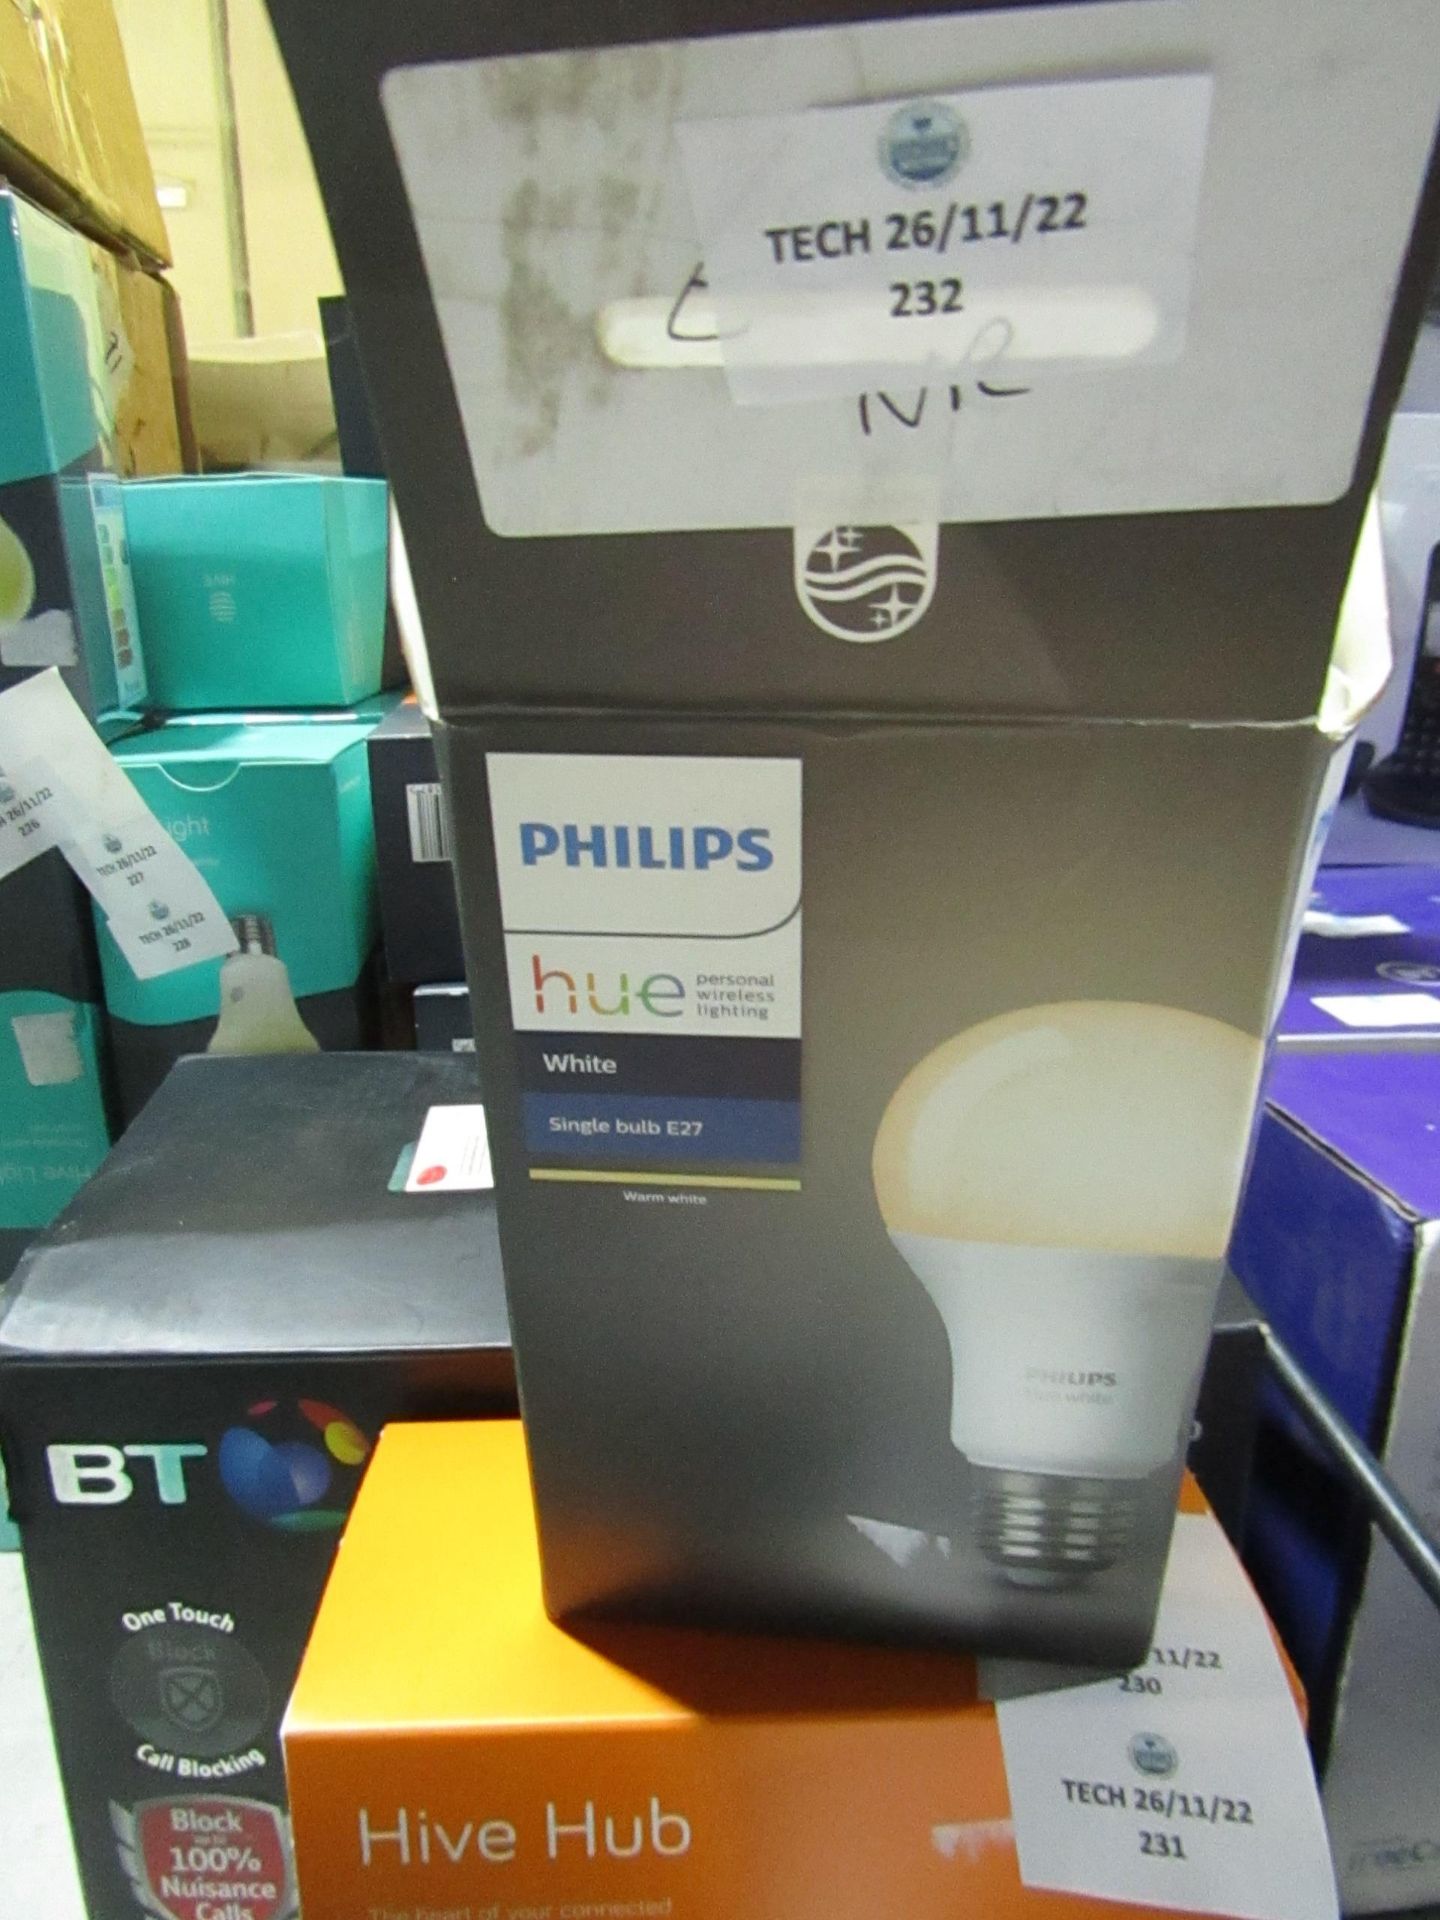 Phillips Hue smat bulb, unchecked in original packaging